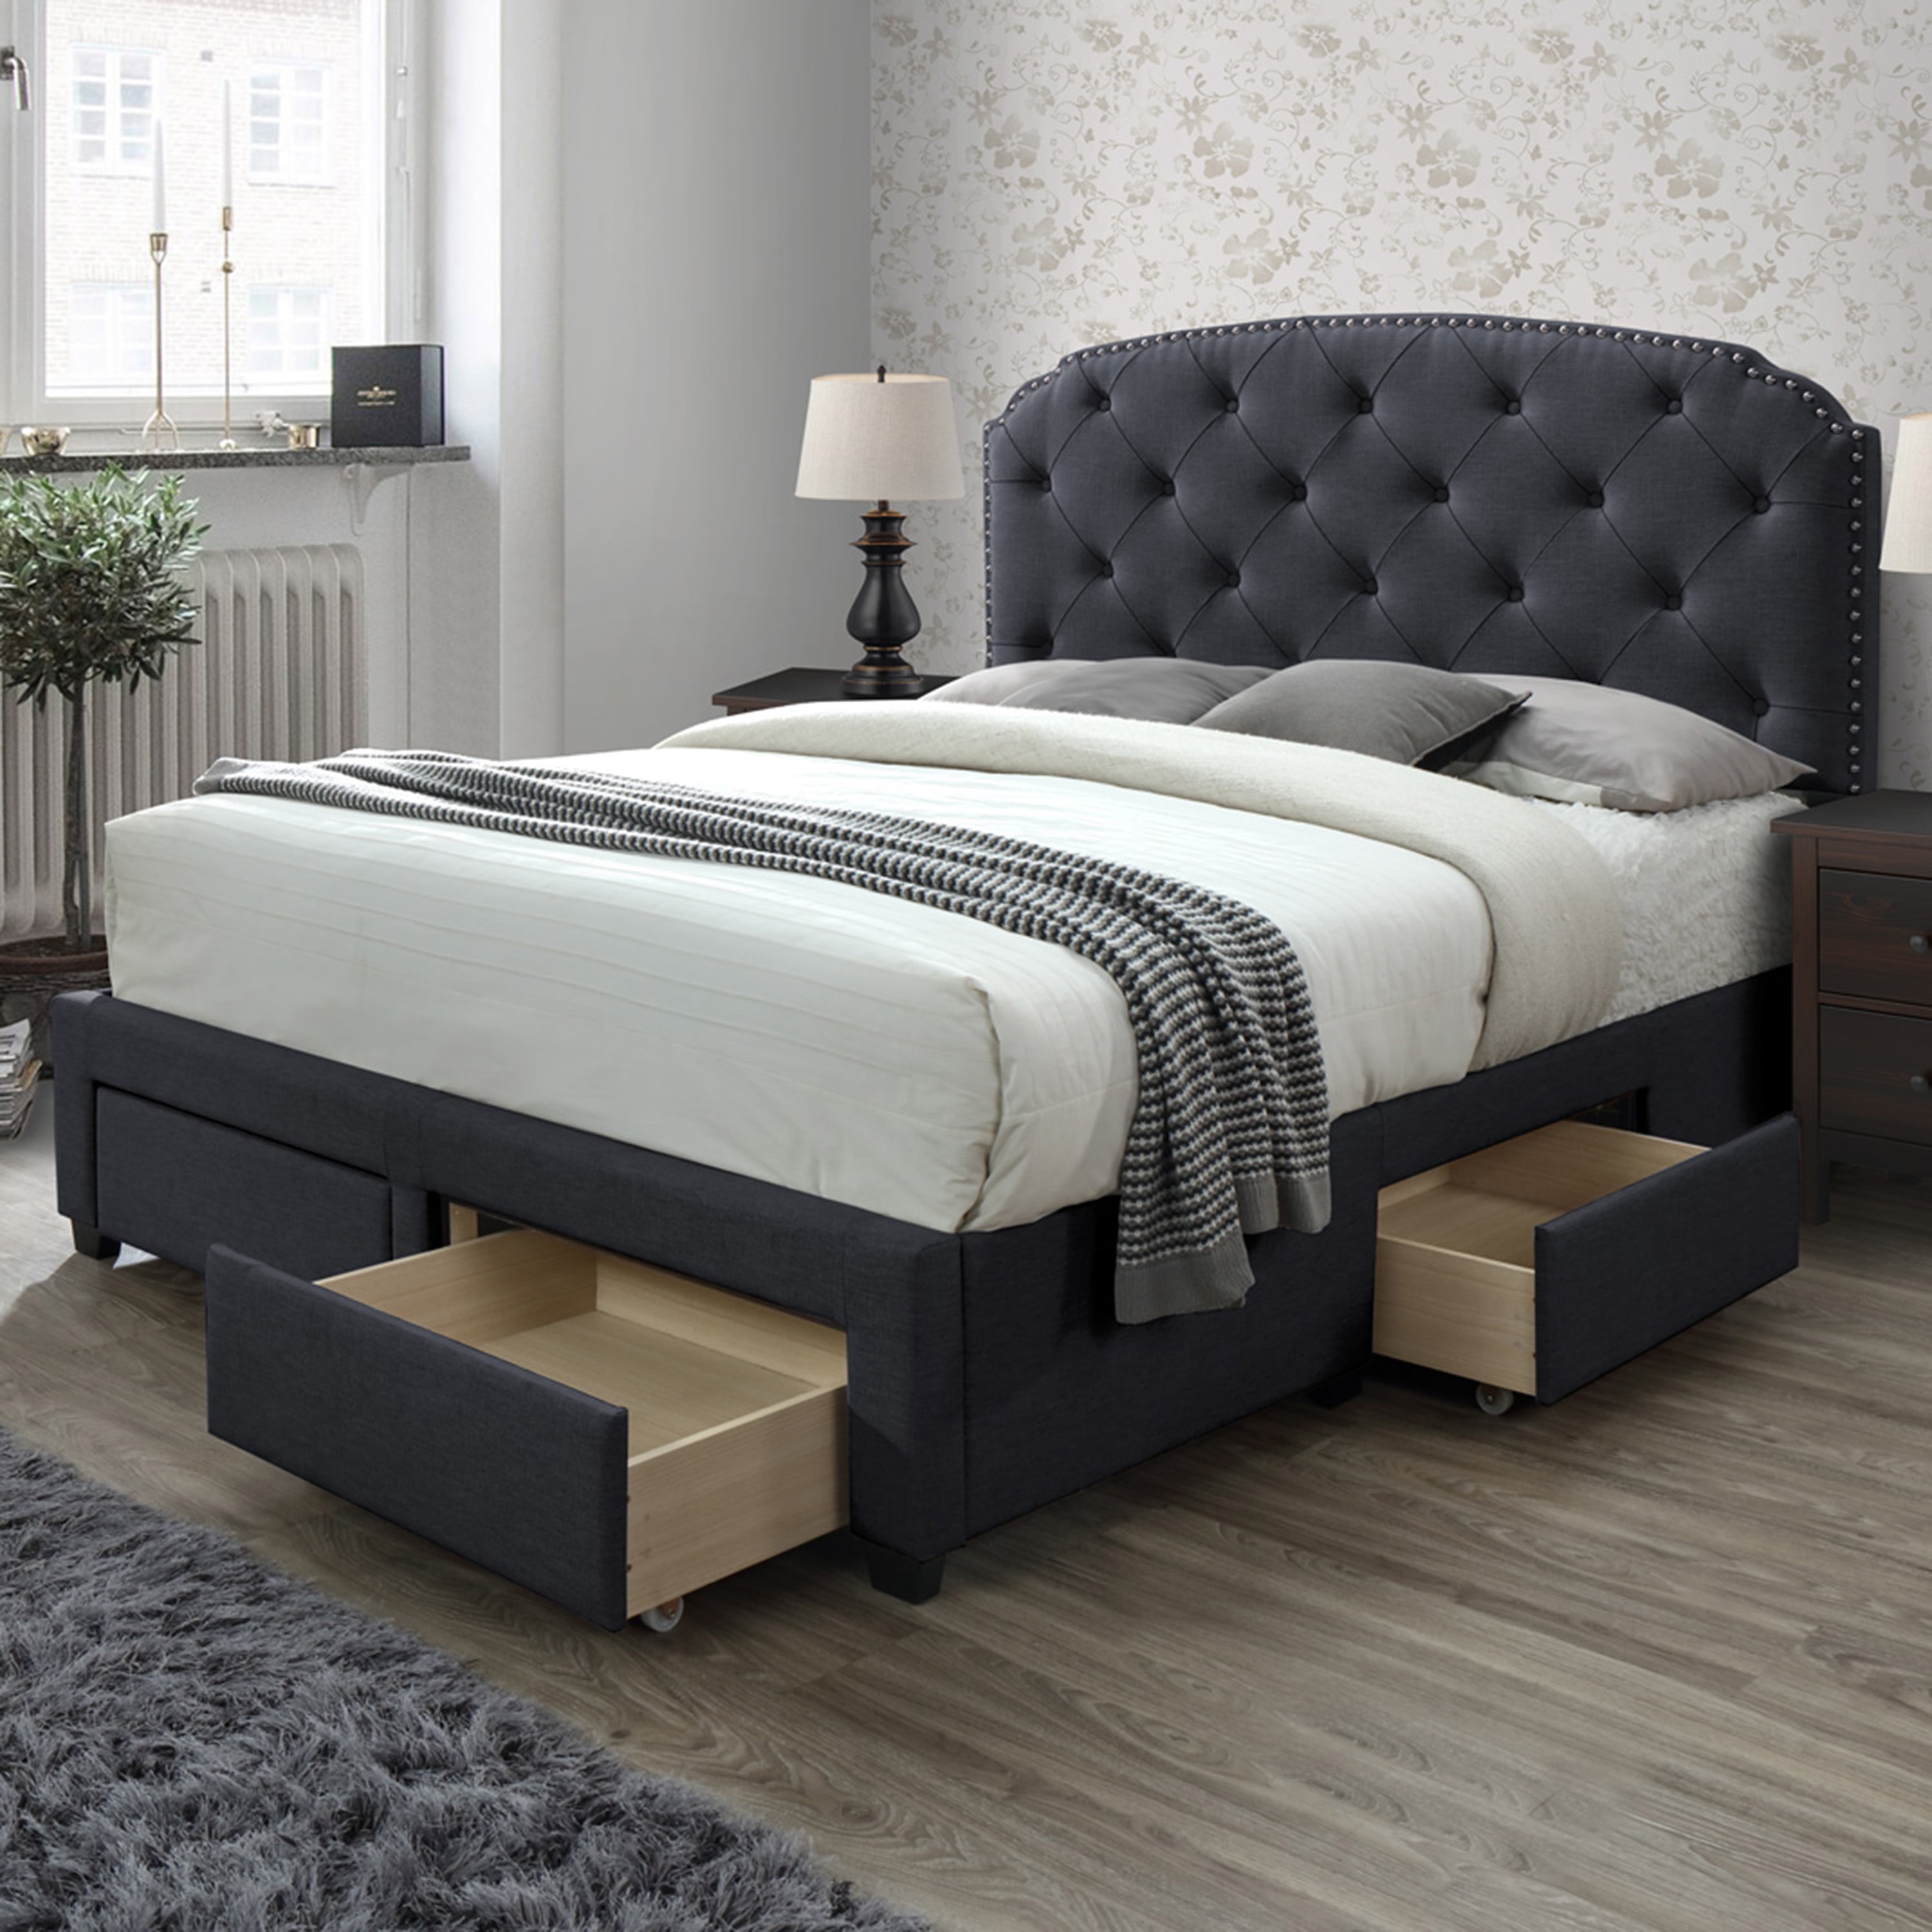 Dg Casa Argo Tufted Upholstered Panel, Queen Bed Frame With Storage In Headboard